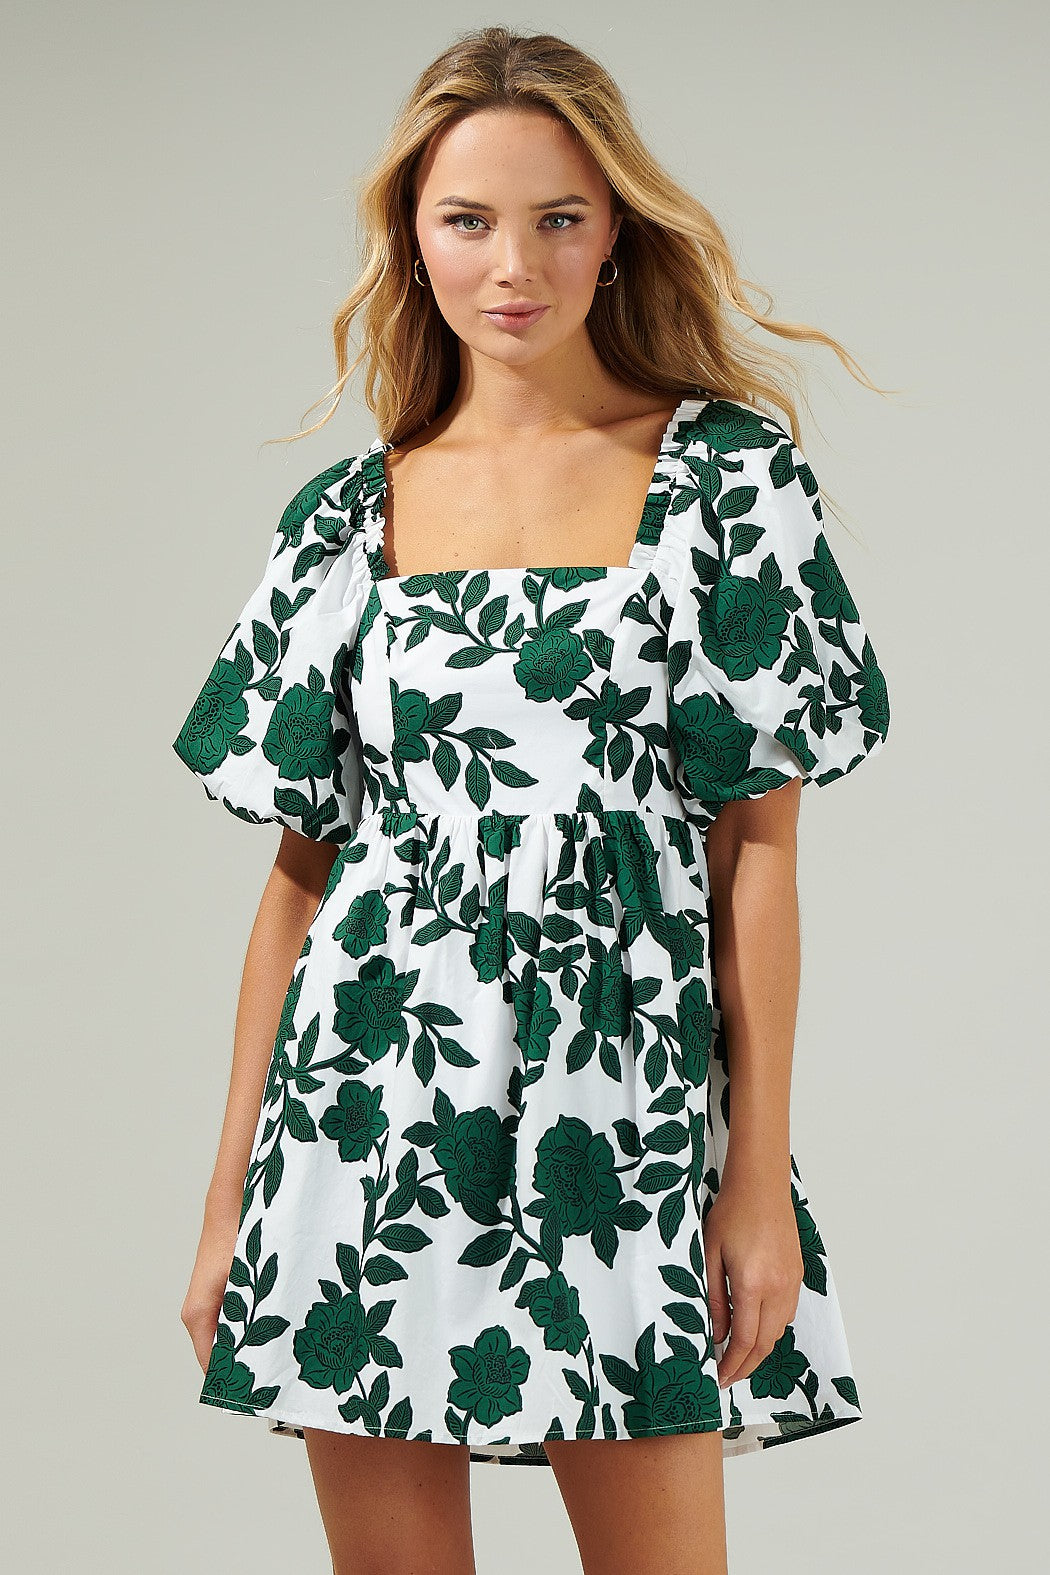 GREEN WITH FLORAL ENVY DRESS